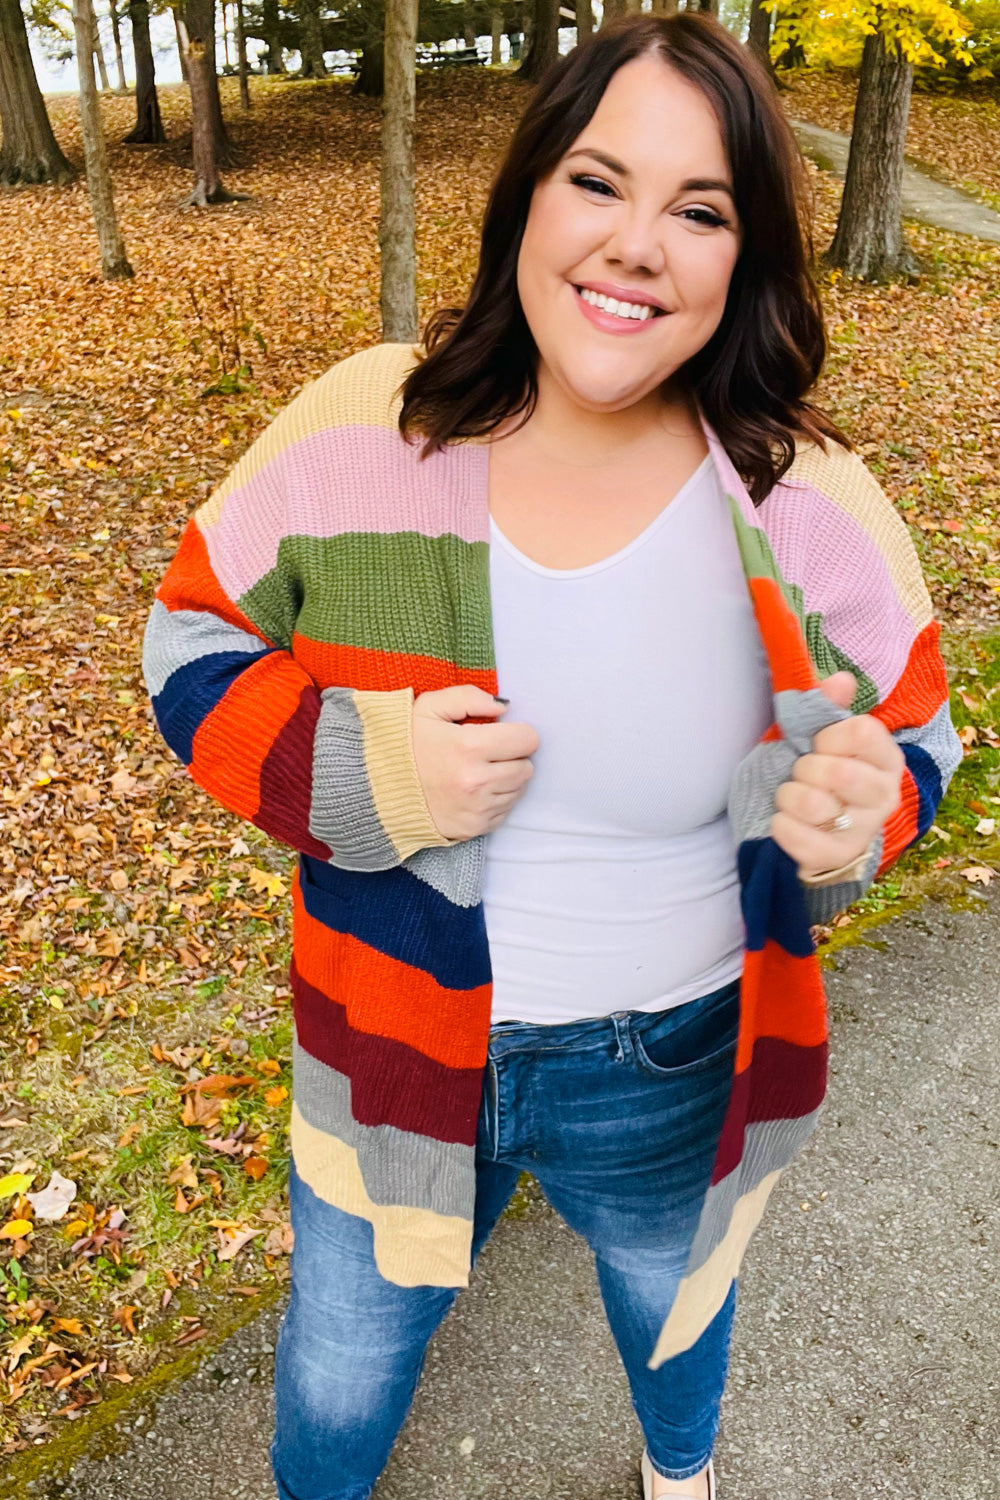 Just A Dream Multicolor Striped Slouchy Open Cardigan - Sybaritic Bags & Clothing